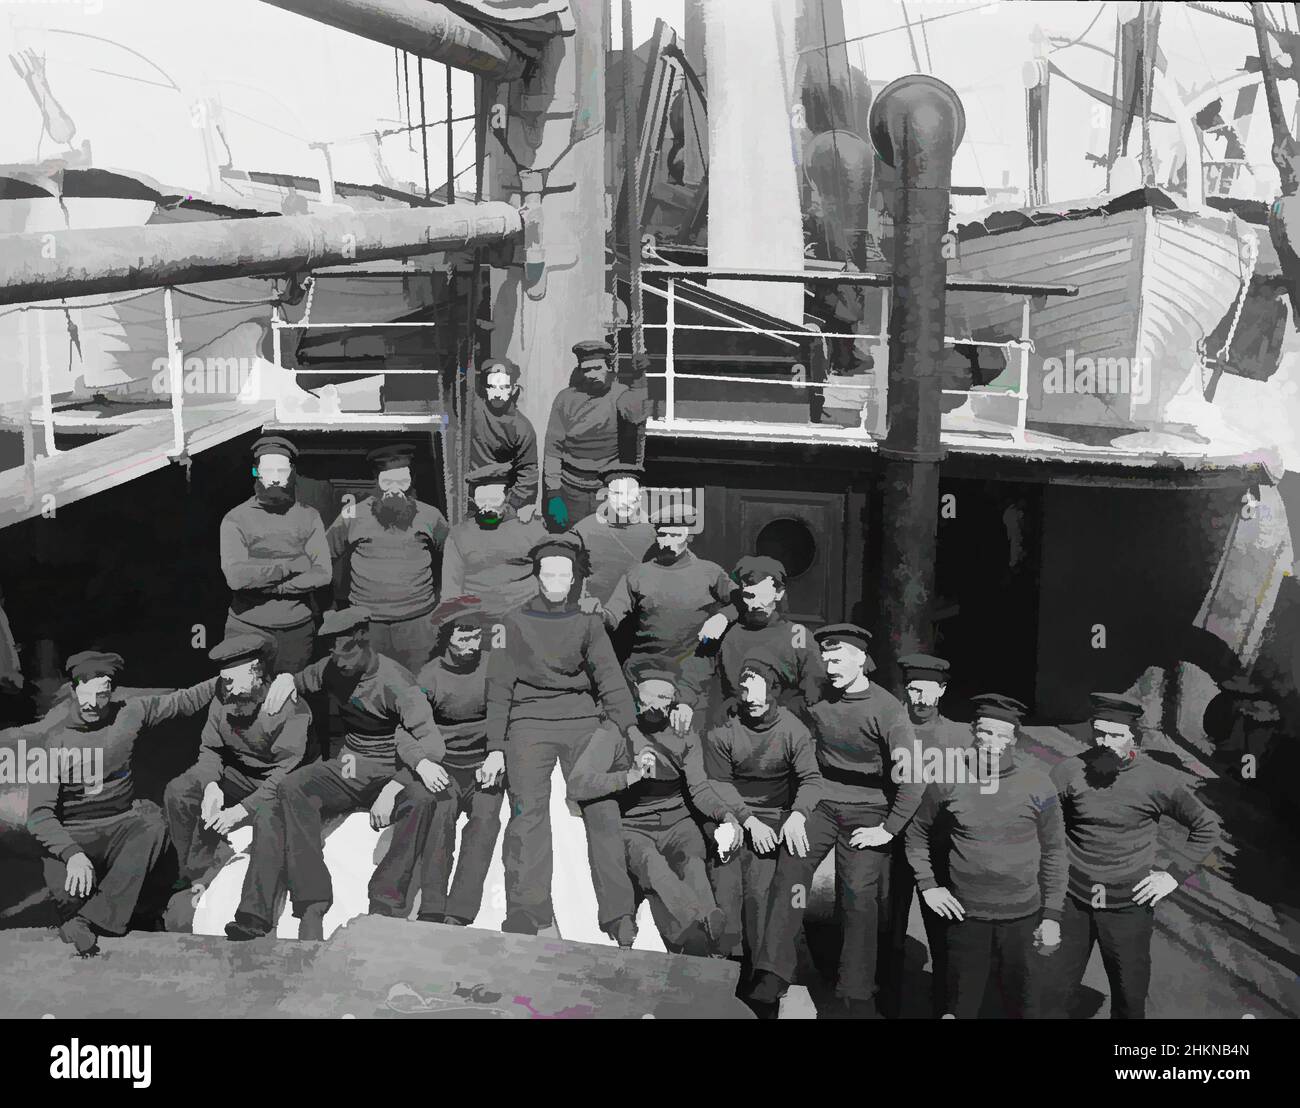 Art inspired by Wairarapa - July '84, Burton Brothers studio, photography studio, 1884, New Zealand, black-and-white photography, Crew of large ship on bottom deck. Nineteen men in Union Steamship Company uniform. Funnel and hight deck behind, with longboats on either side, Classic works modernized by Artotop with a splash of modernity. Shapes, color and value, eye-catching visual impact on art. Emotions through freedom of artworks in a contemporary way. A timeless message pursuing a wildly creative new direction. Artists turning to the digital medium and creating the Artotop NFT Stock Photo